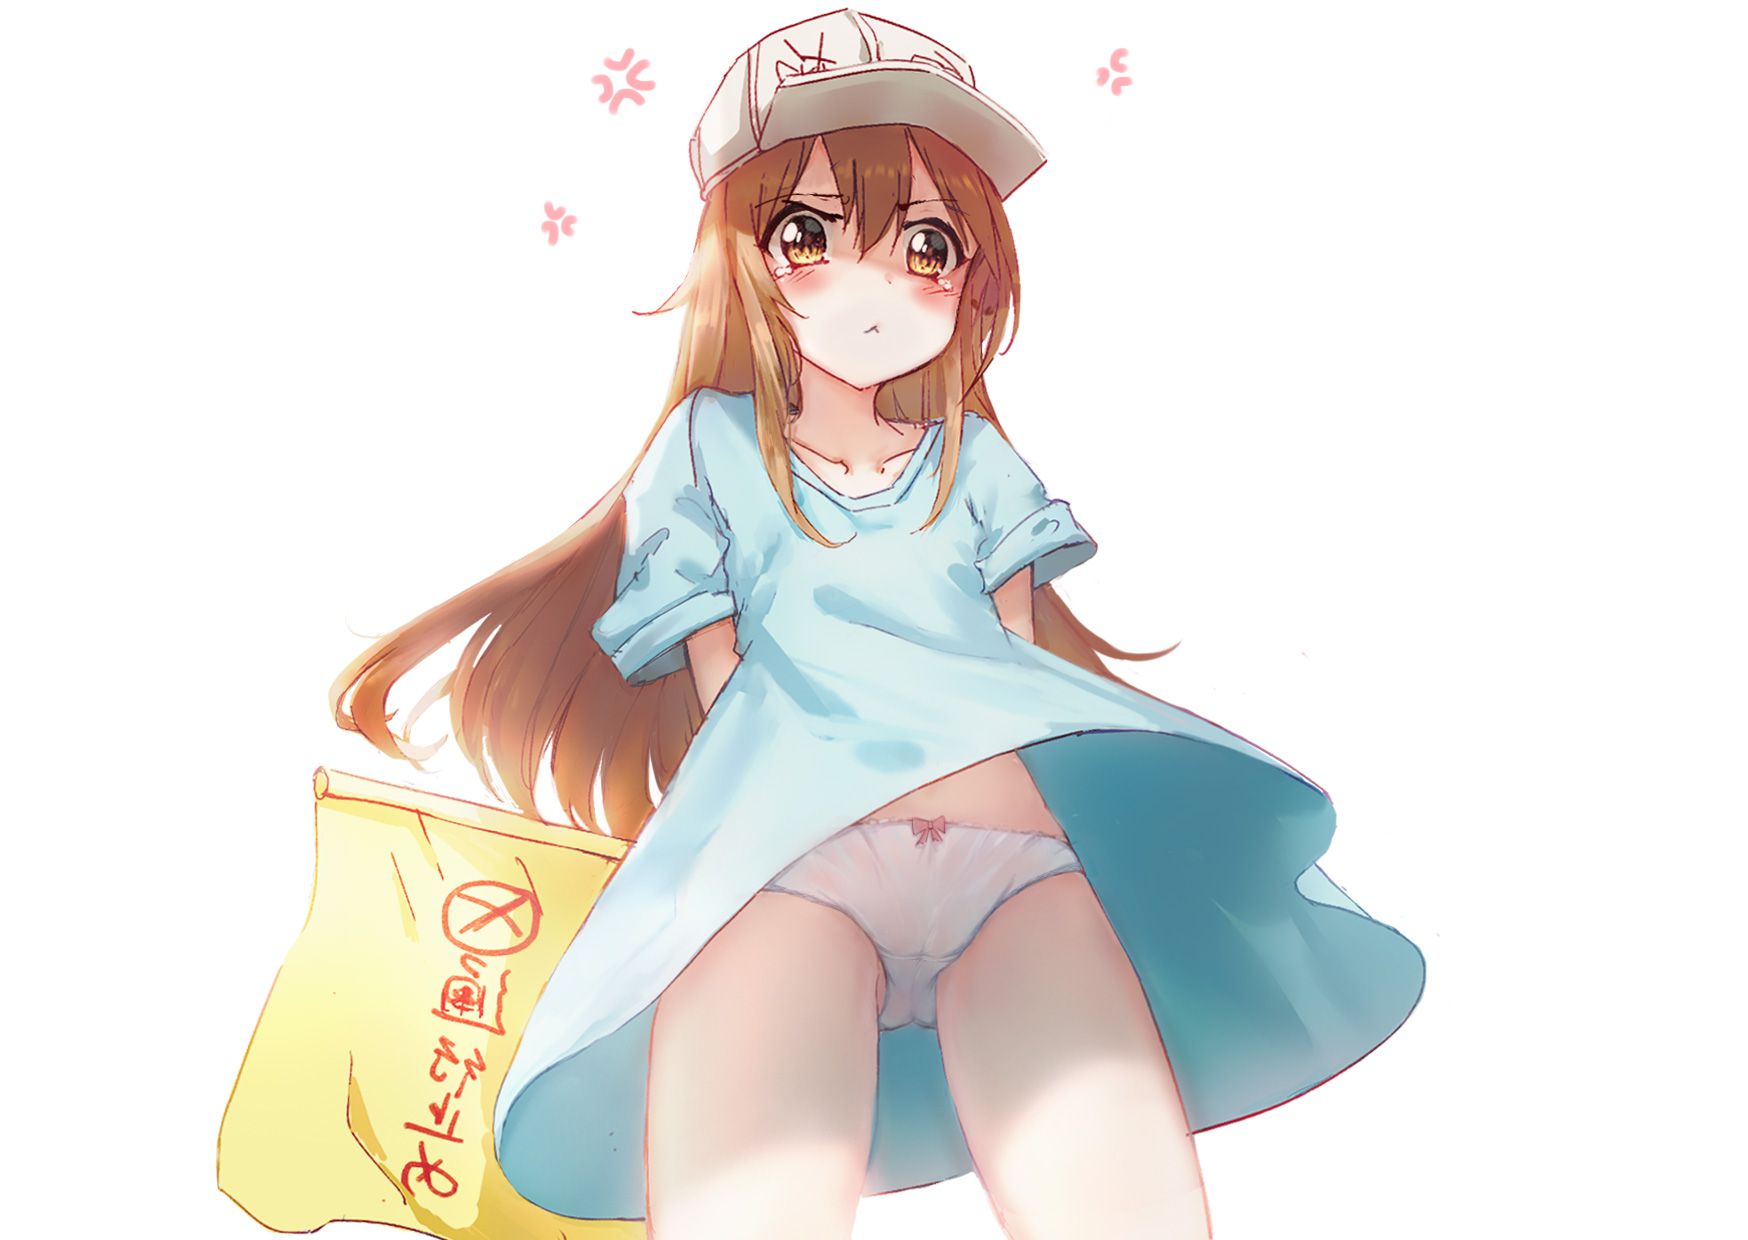 [Working cells] secondary images of platelets 1 60 sheets [ero/non-erotic] 6